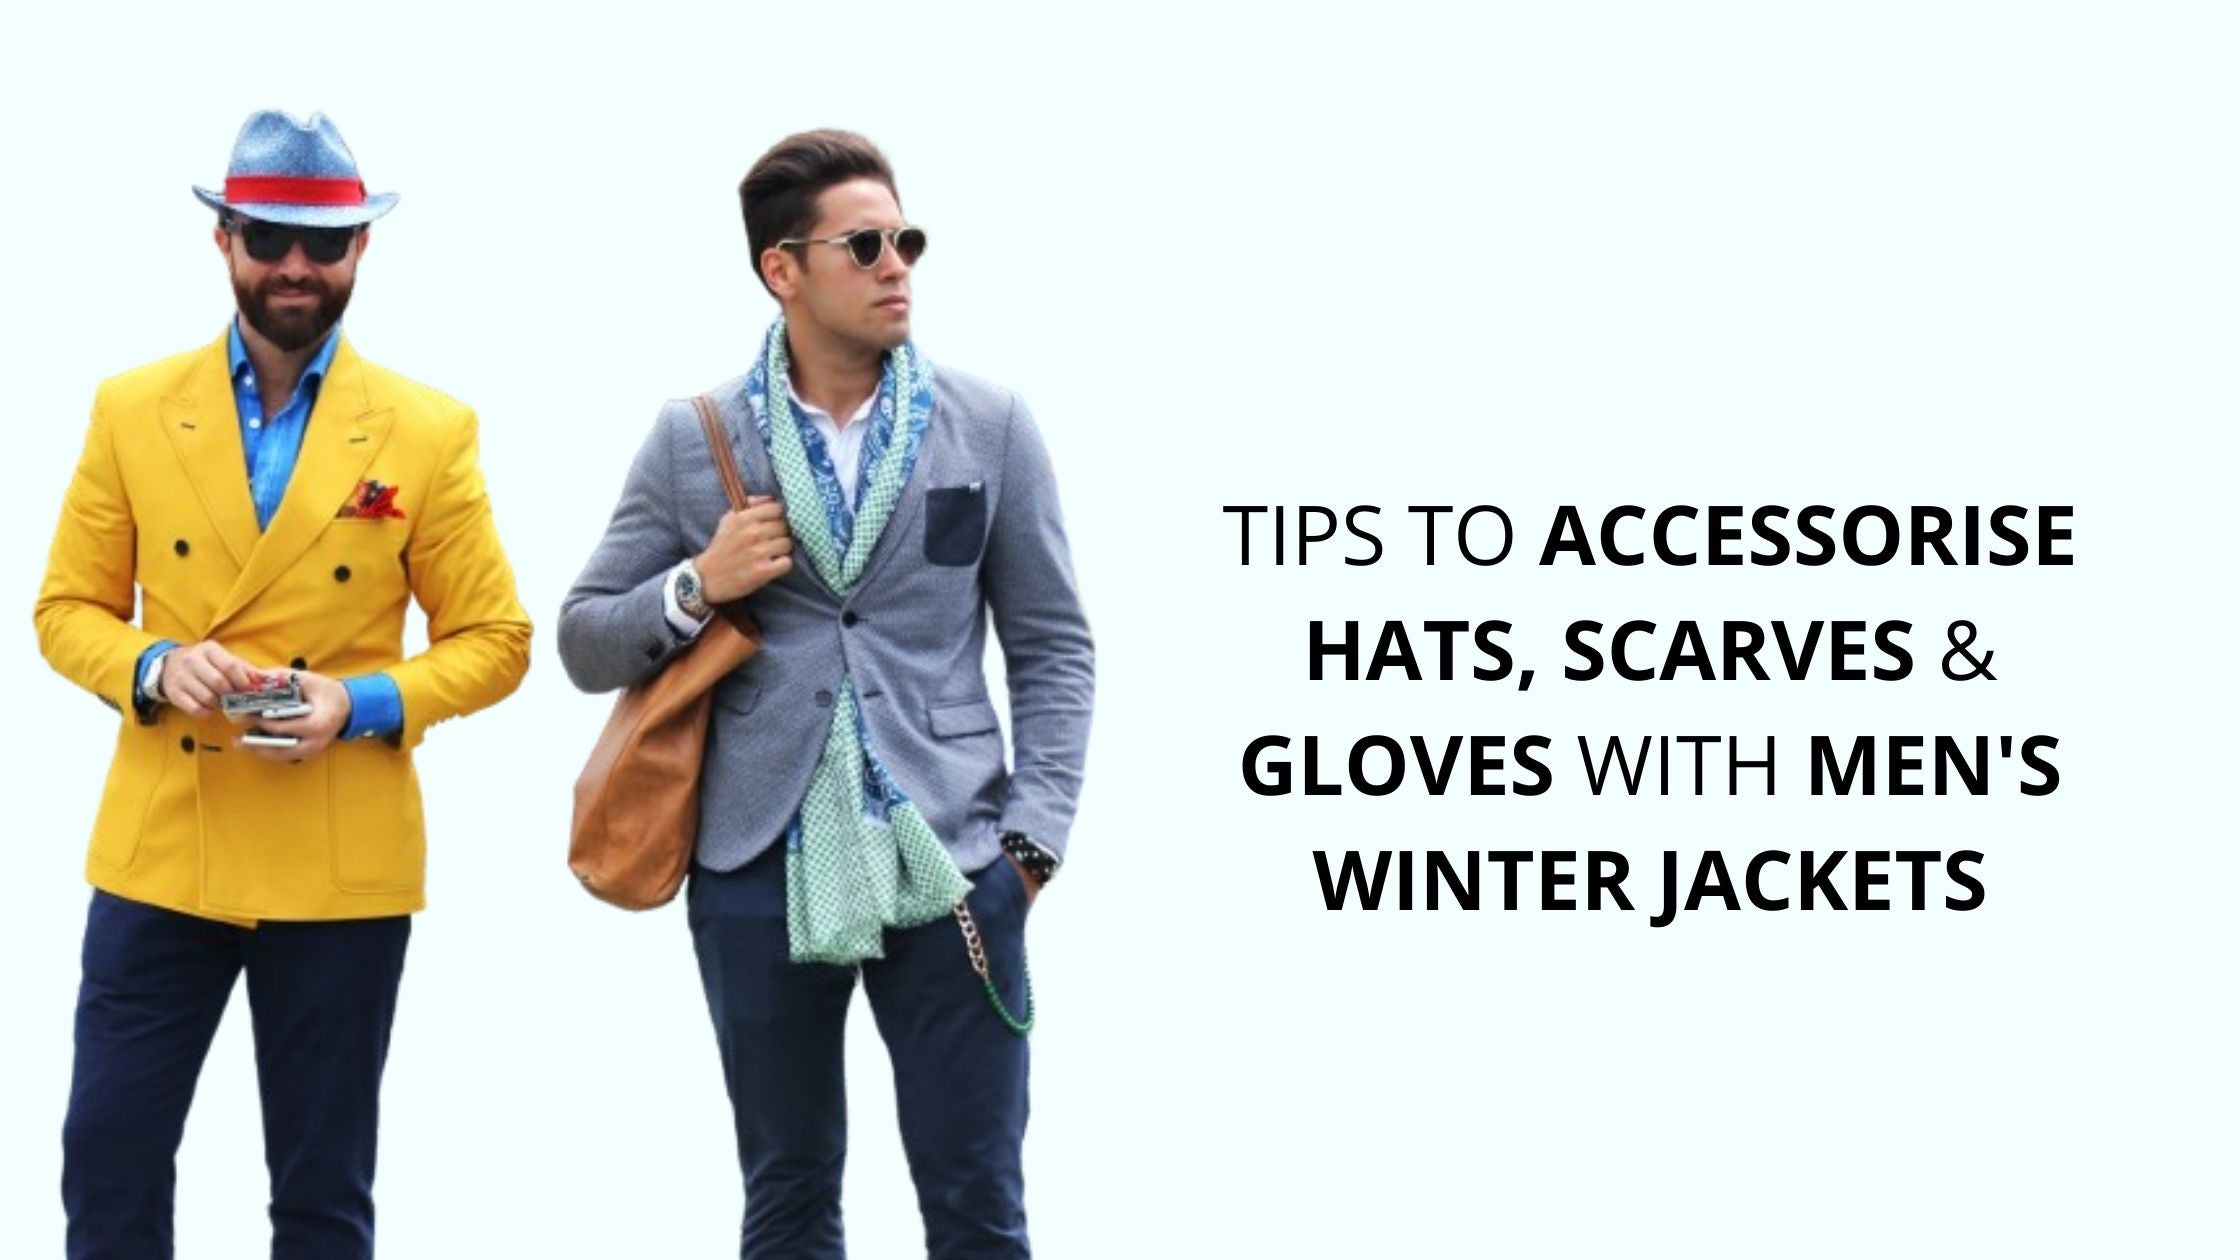 Tips to Accessorize Hats, Scarves and Gloves with Men's Winter Jackets